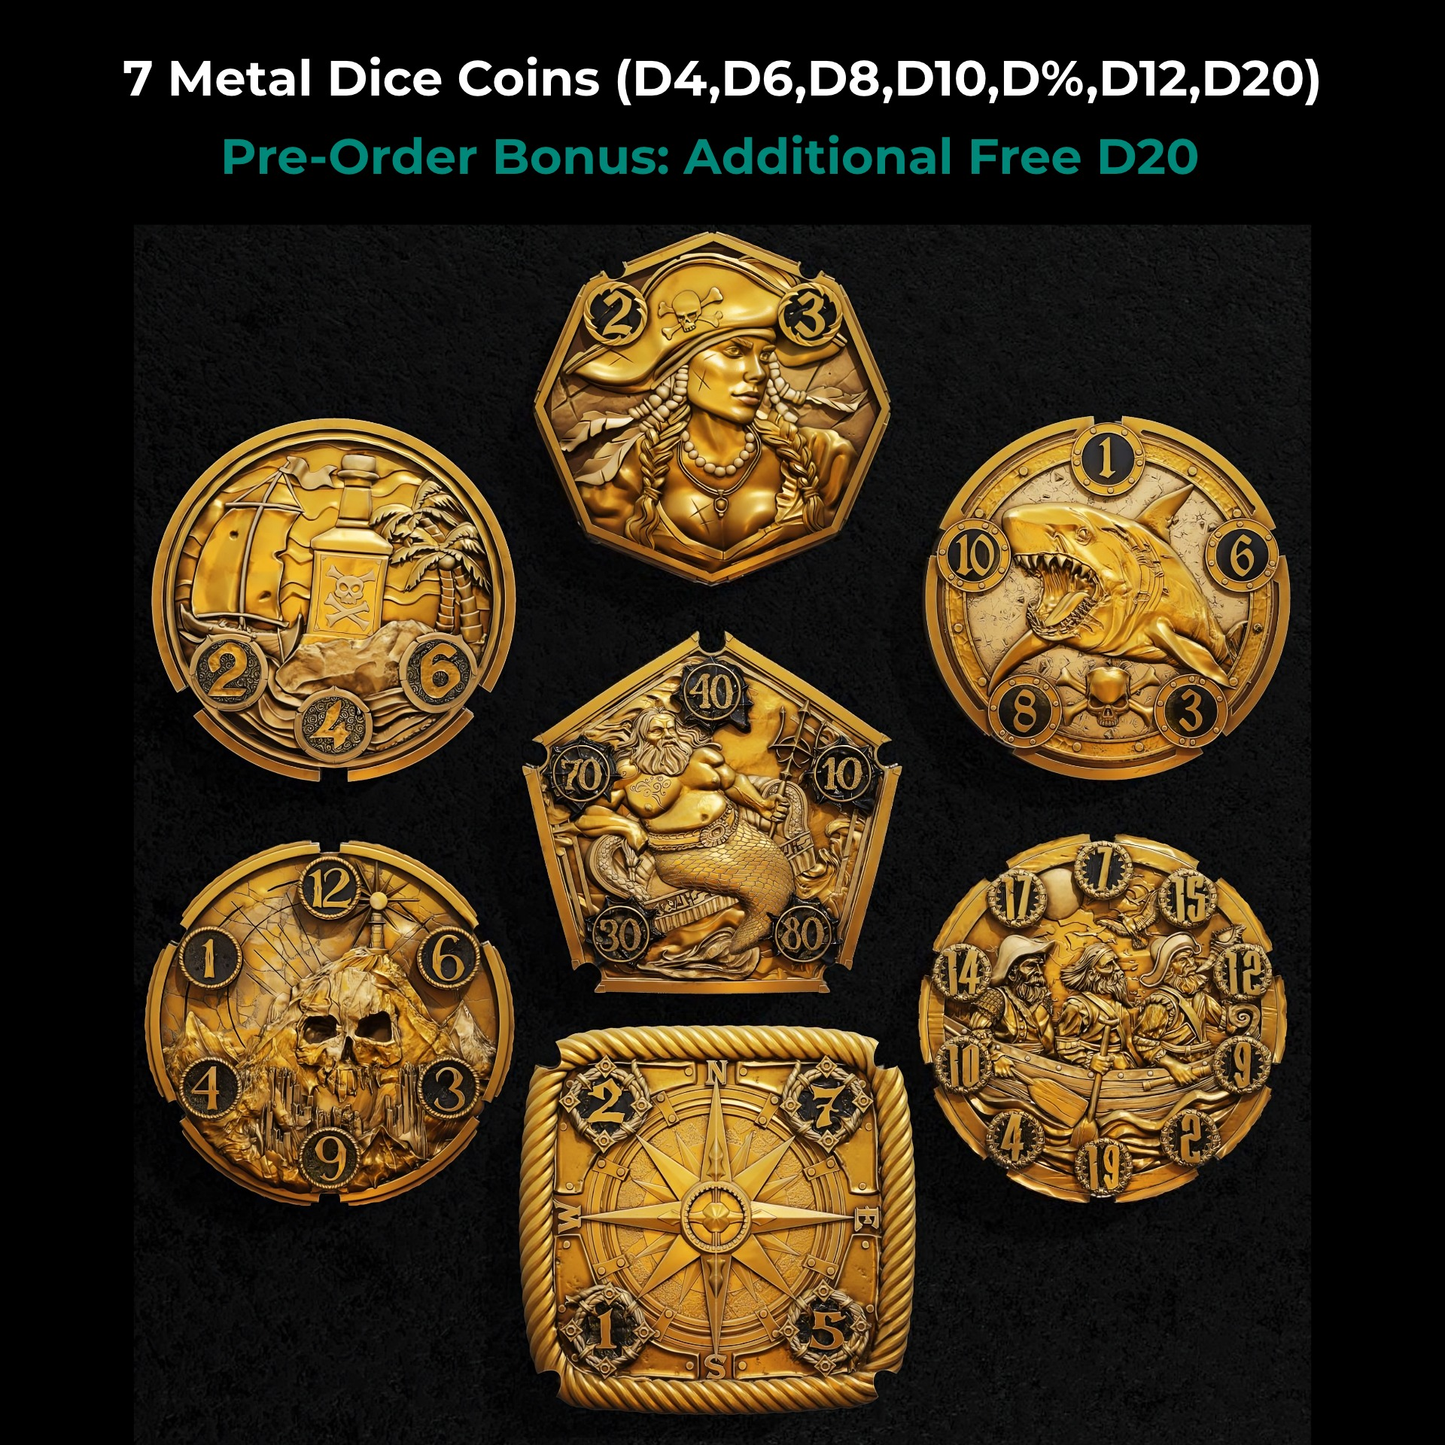 Flipdie Dice Coin - The First Dice You Flip Like a Coin